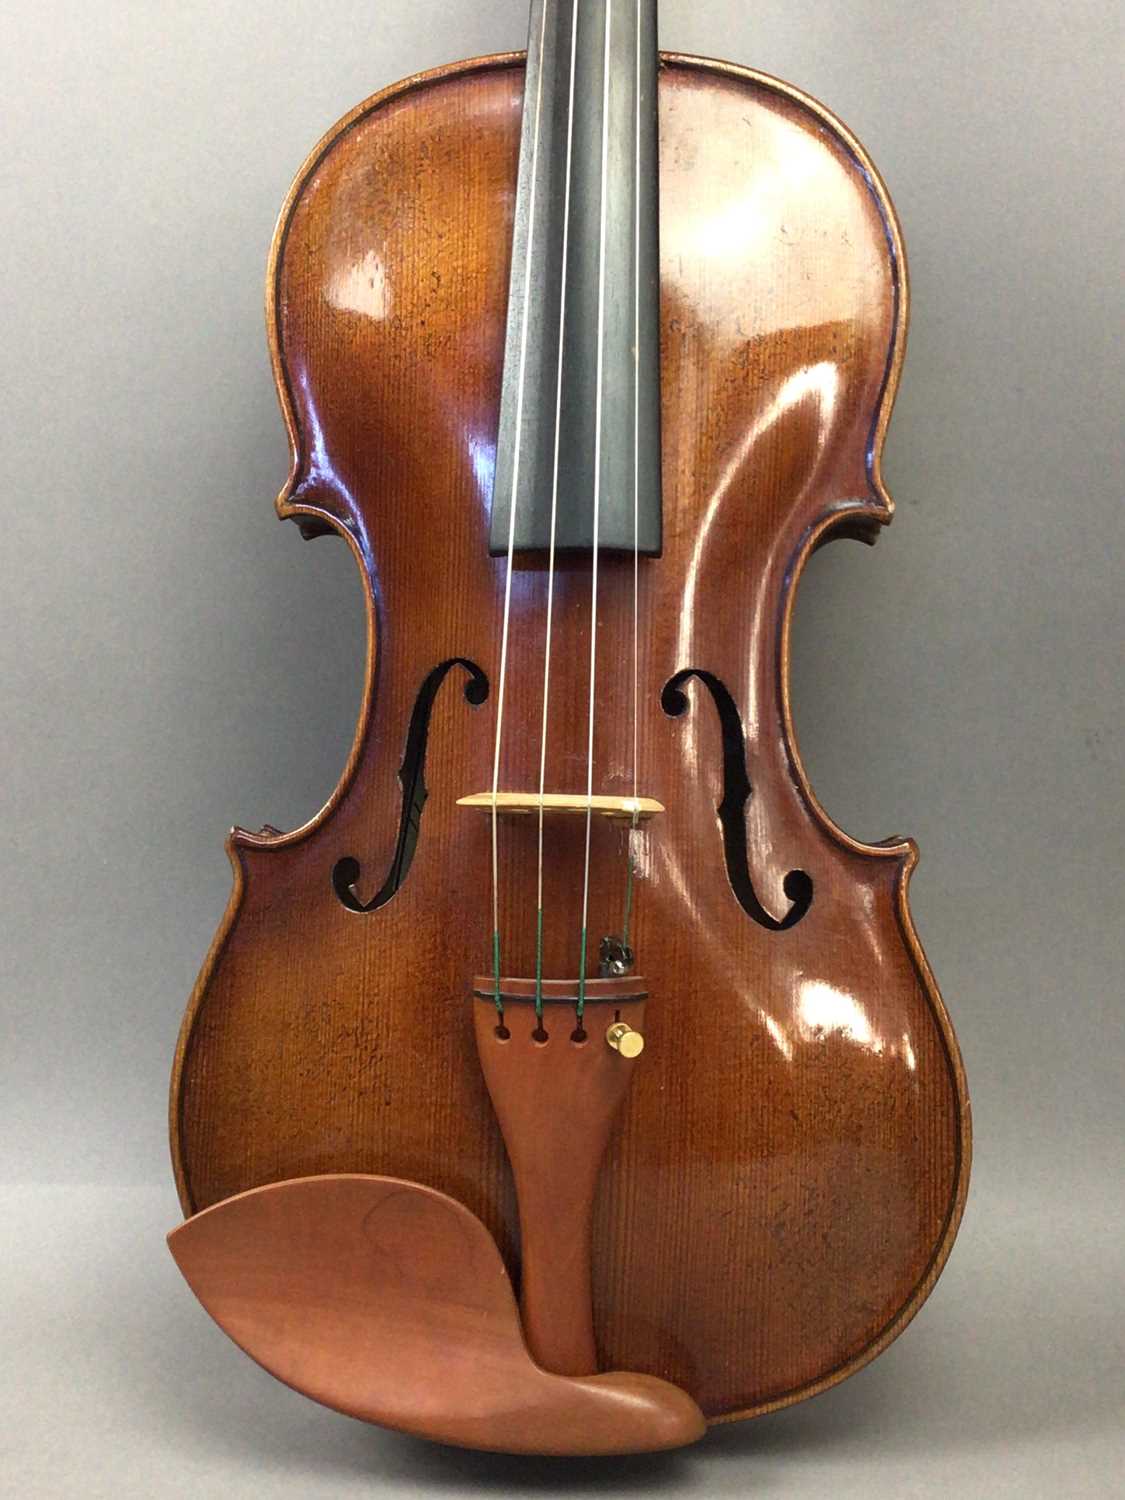 Lot 640 - AN ITALIAN FULL SIZE AMARTI MODEL VIOLIN BY GUISEPPE SELVA OF BOLOGNA